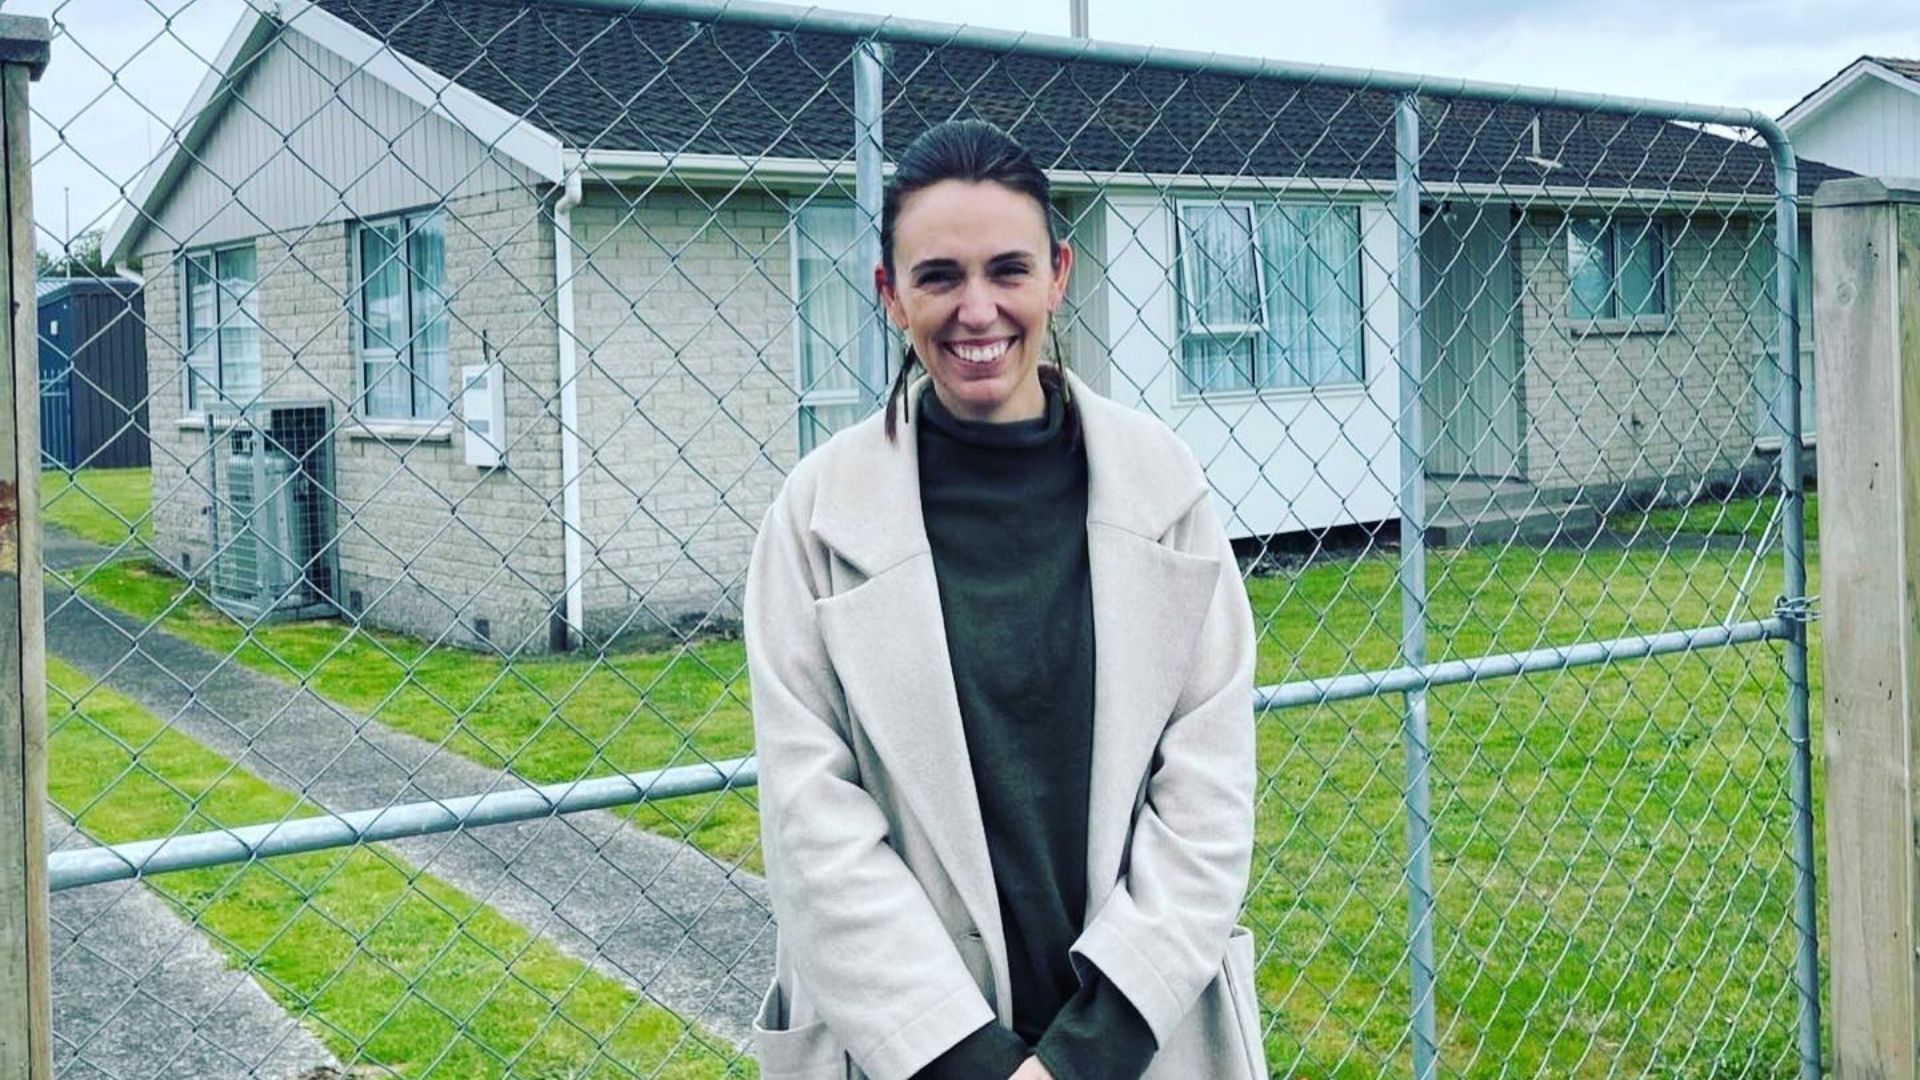 Famous mothers of the world: JAcinda Ardern